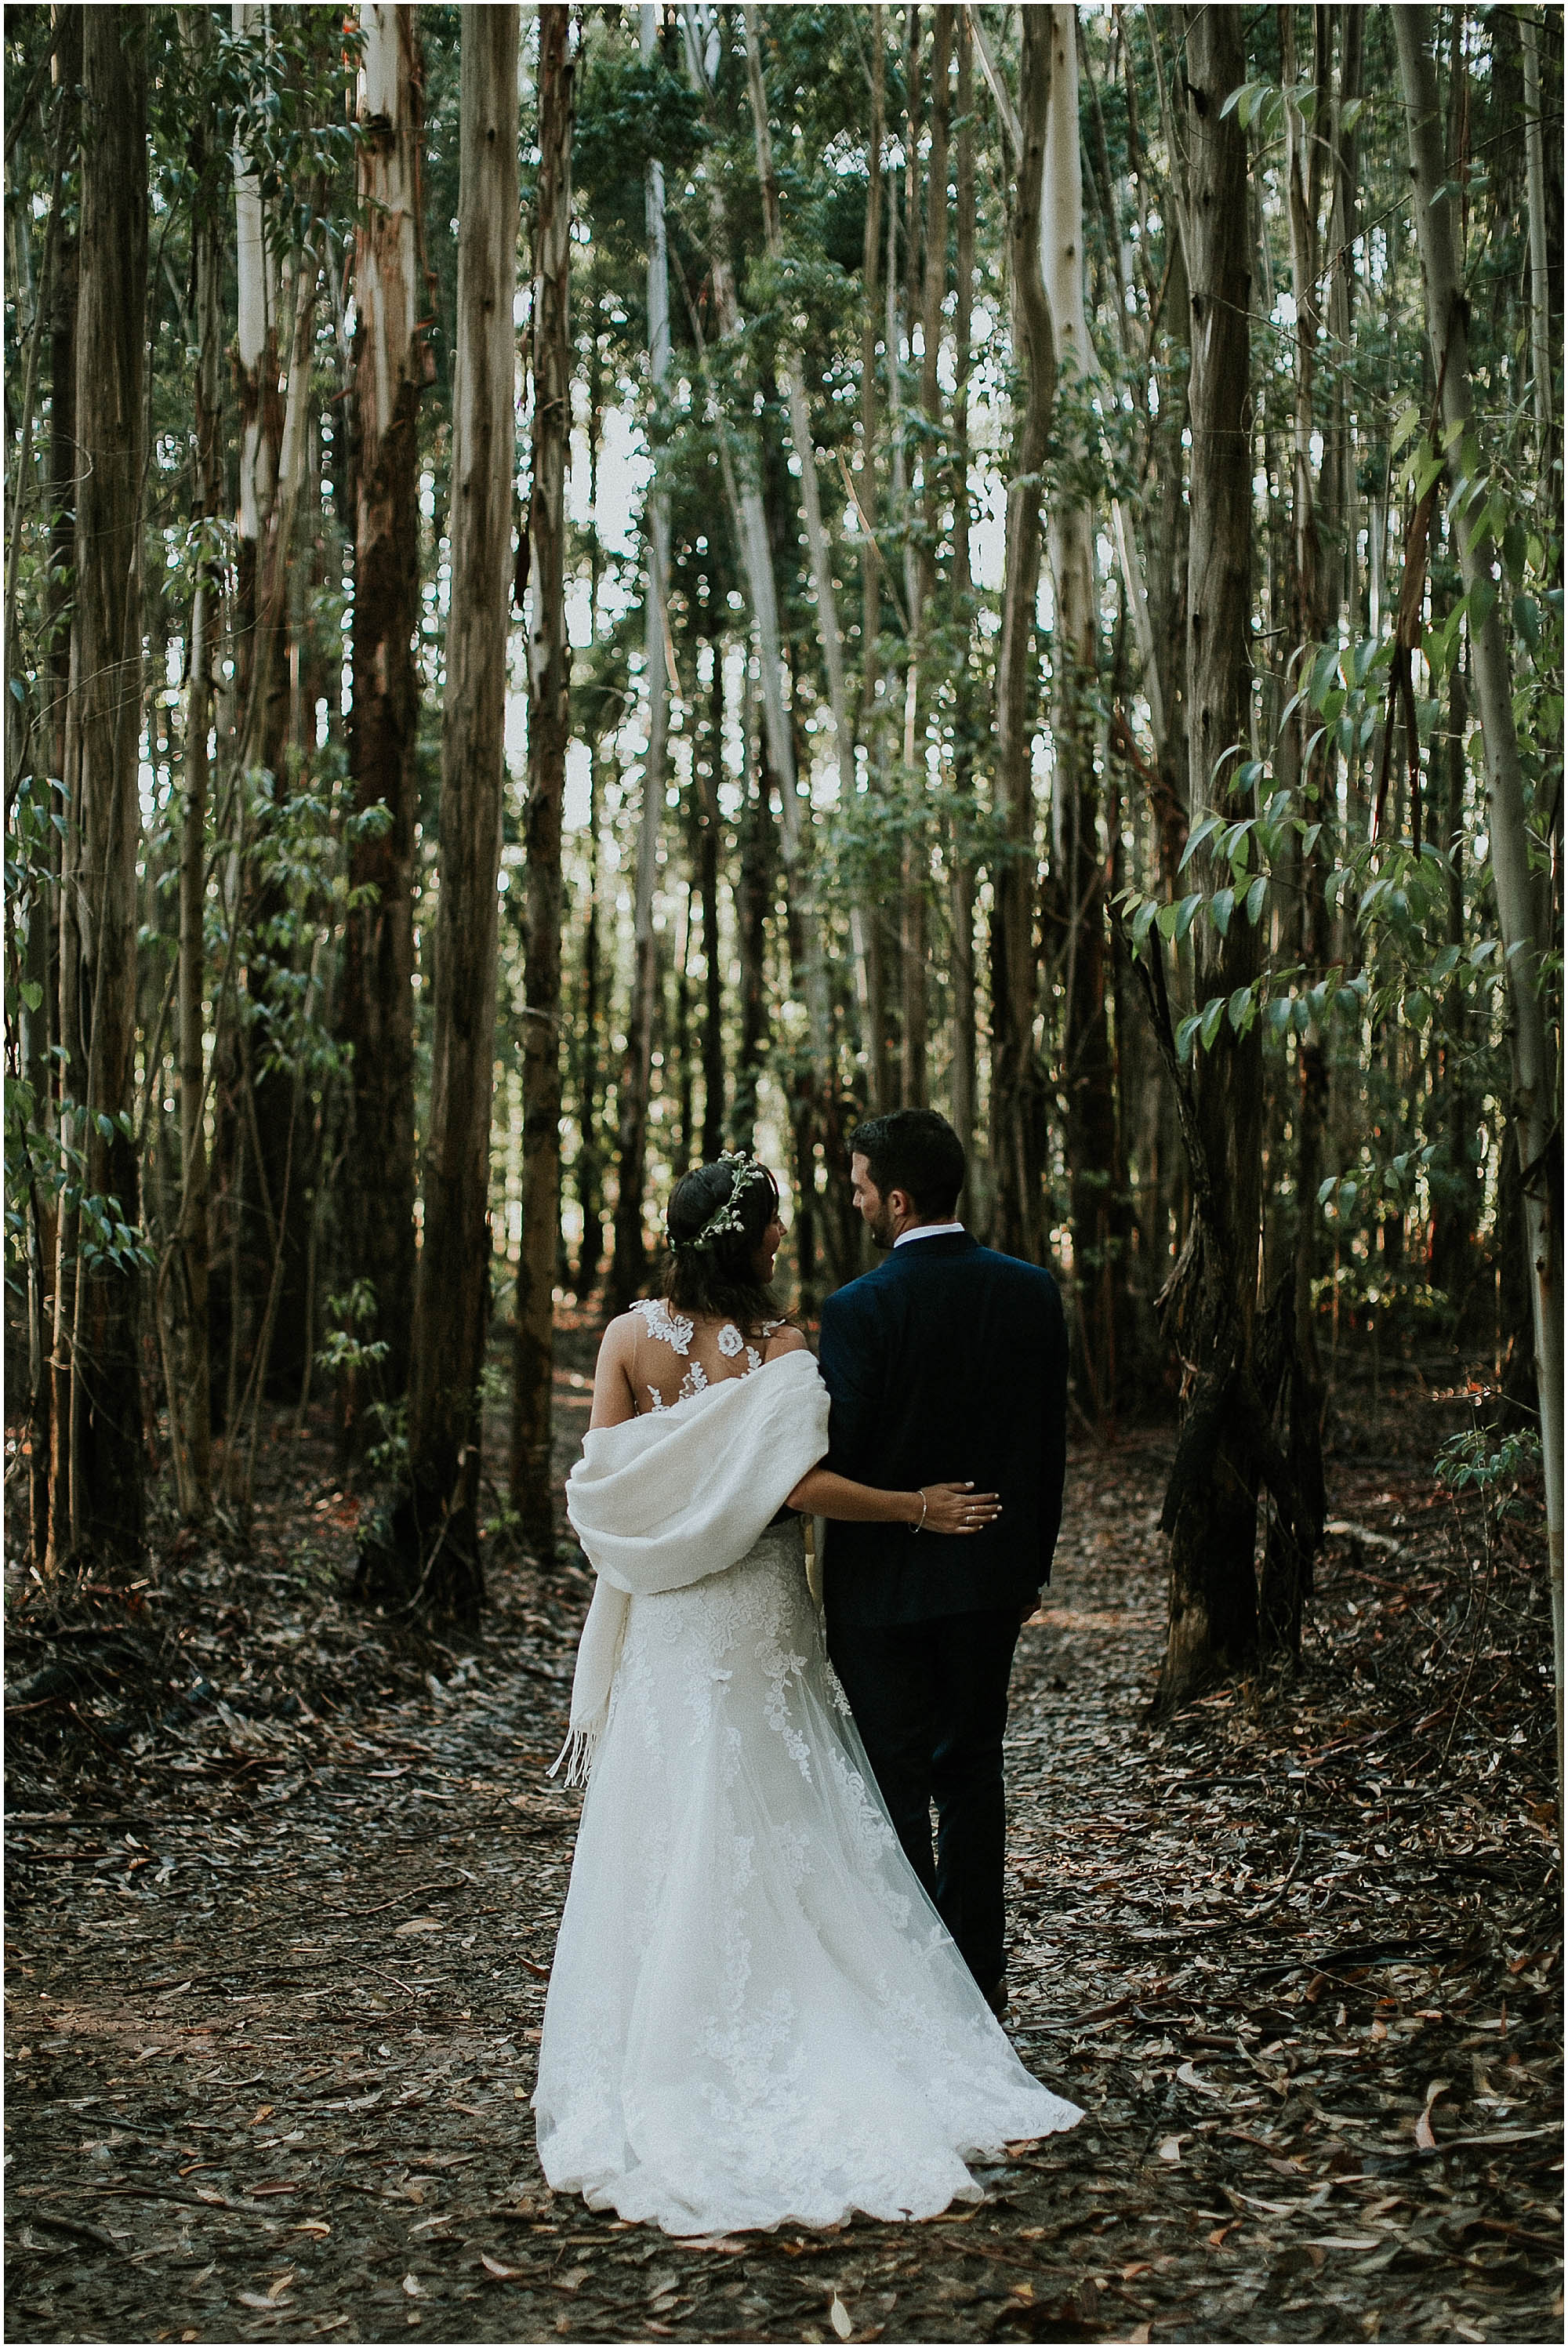 Outdoor-Forest-Destination-Wedding-Photographer-Maryke-Albertyn-Photography-Looks-Like-Film-Authentic-Alternative-Cape-Town-Pretoria-Silver-Sixpence-Dullstroom-bride-and-groom-couple-shoot